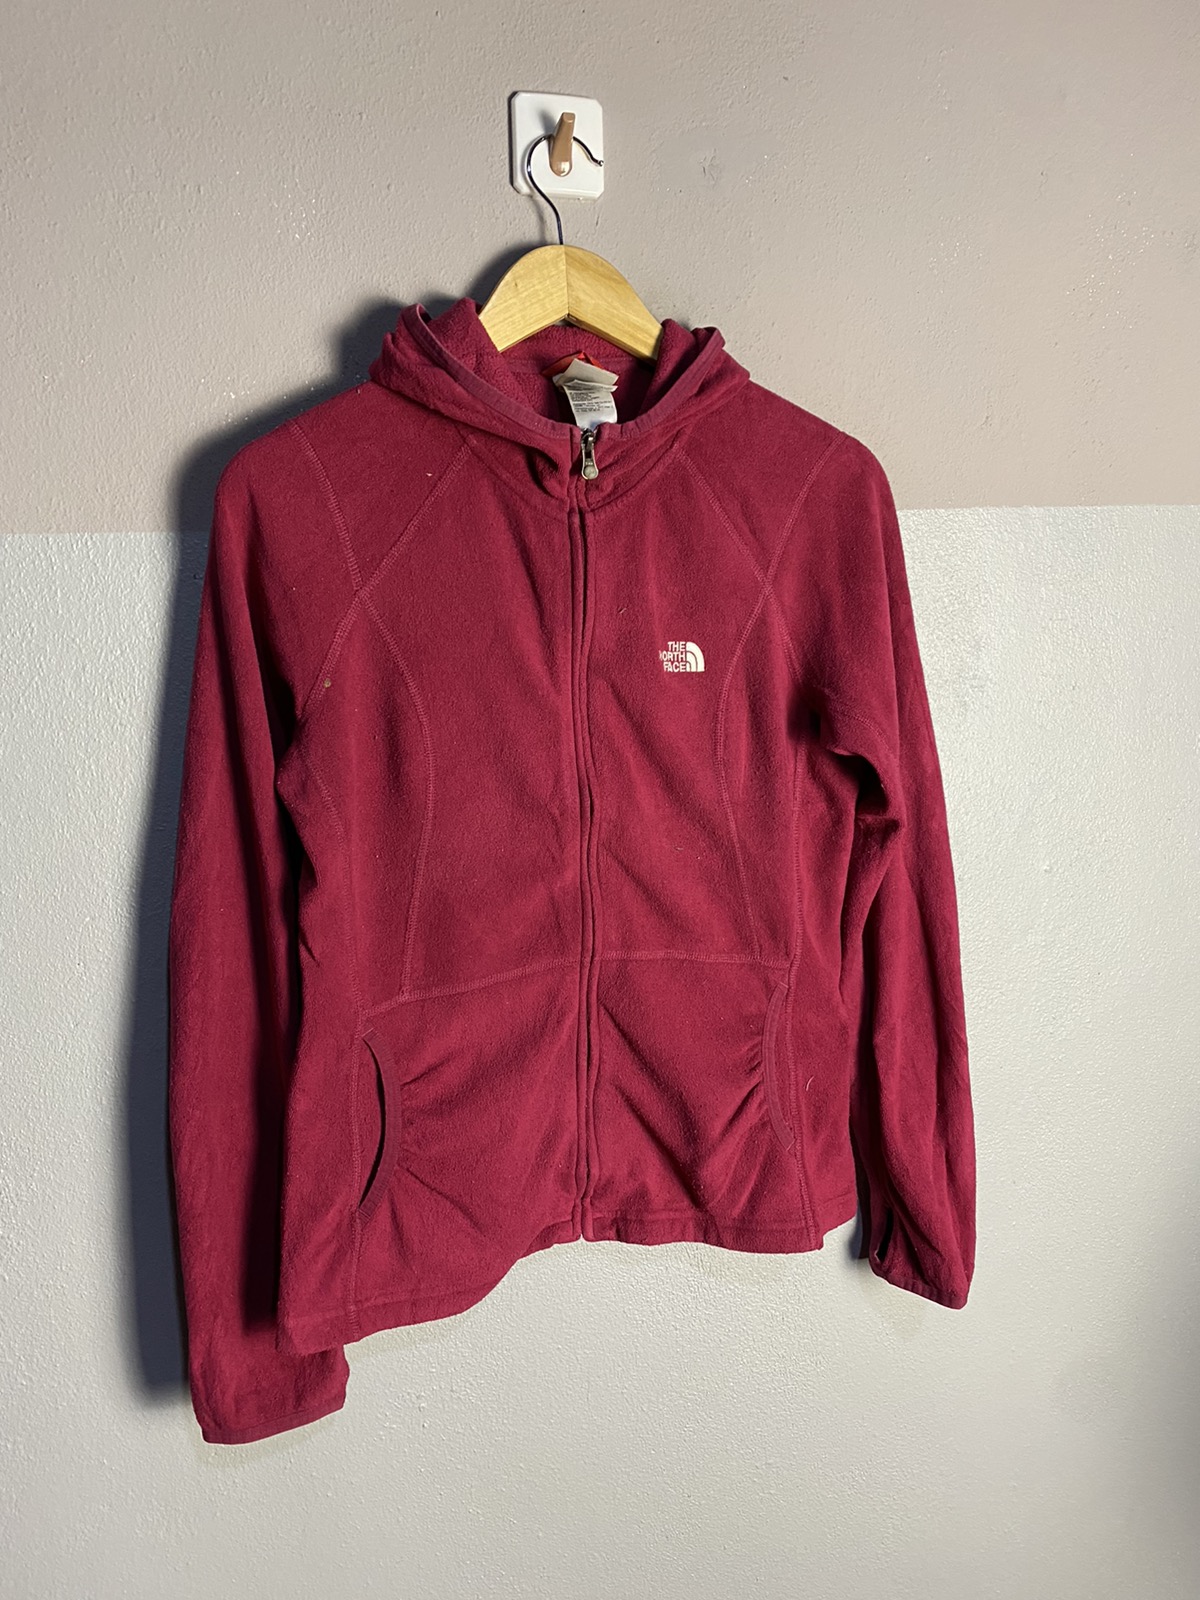 🔥SALE🔥THE NORTH FACE HOODIE - 3